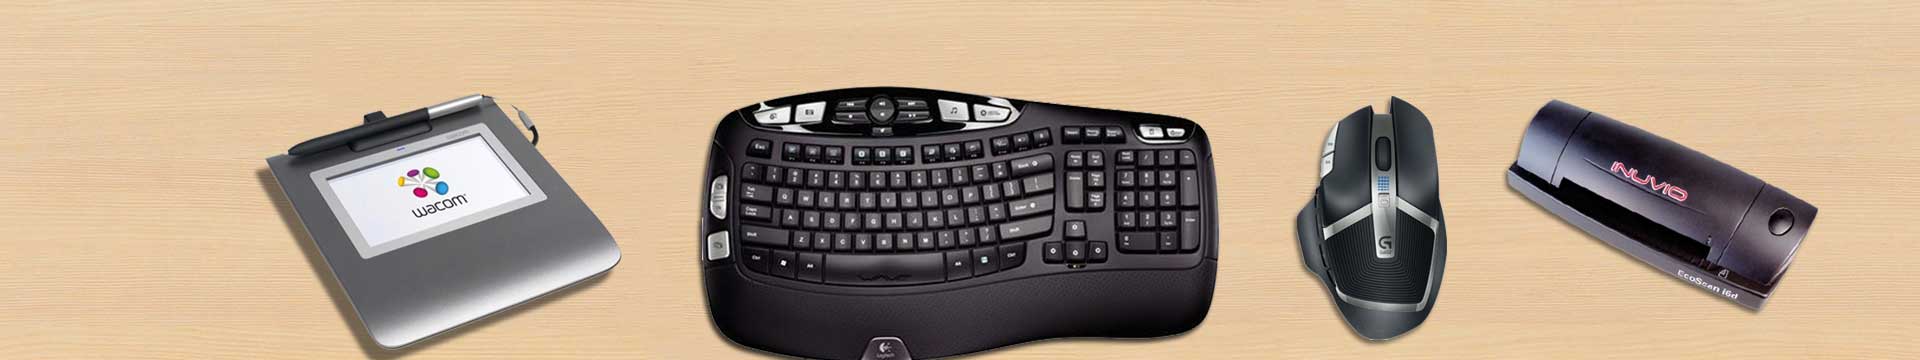 INPUT DEVICES, PERIPHERAL, MOUSE, KEYBOARD